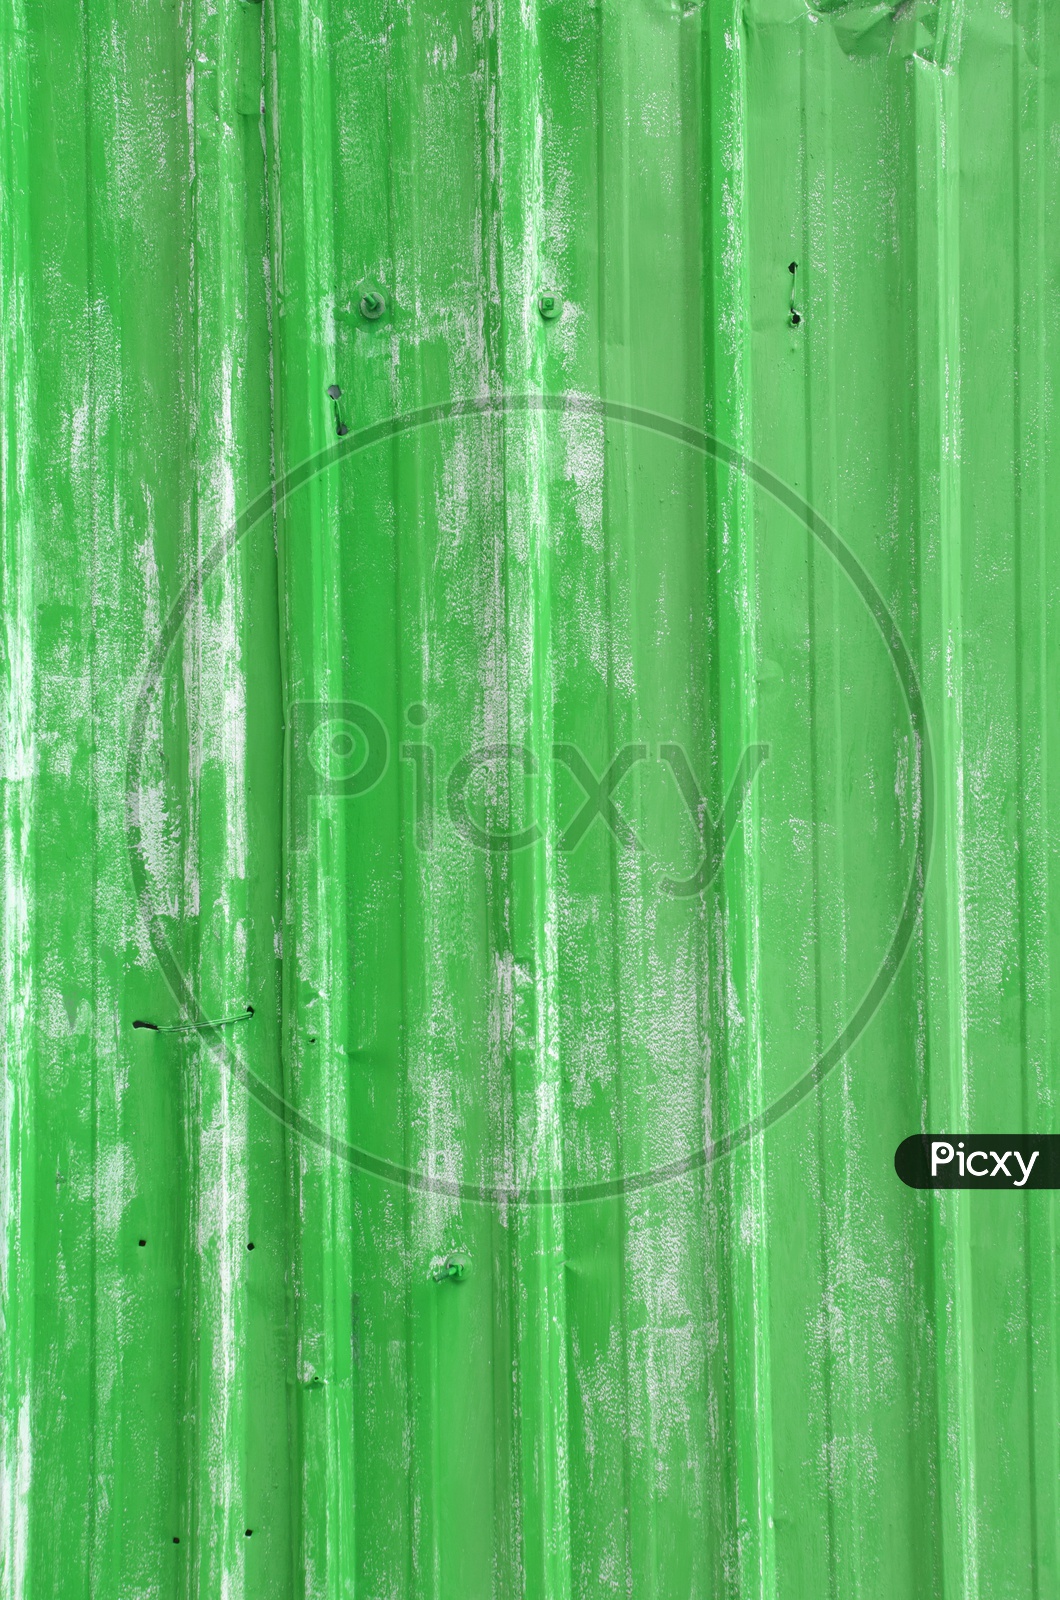 Rusty corrugated iron metal fence Zinc wall texture background of  Green color